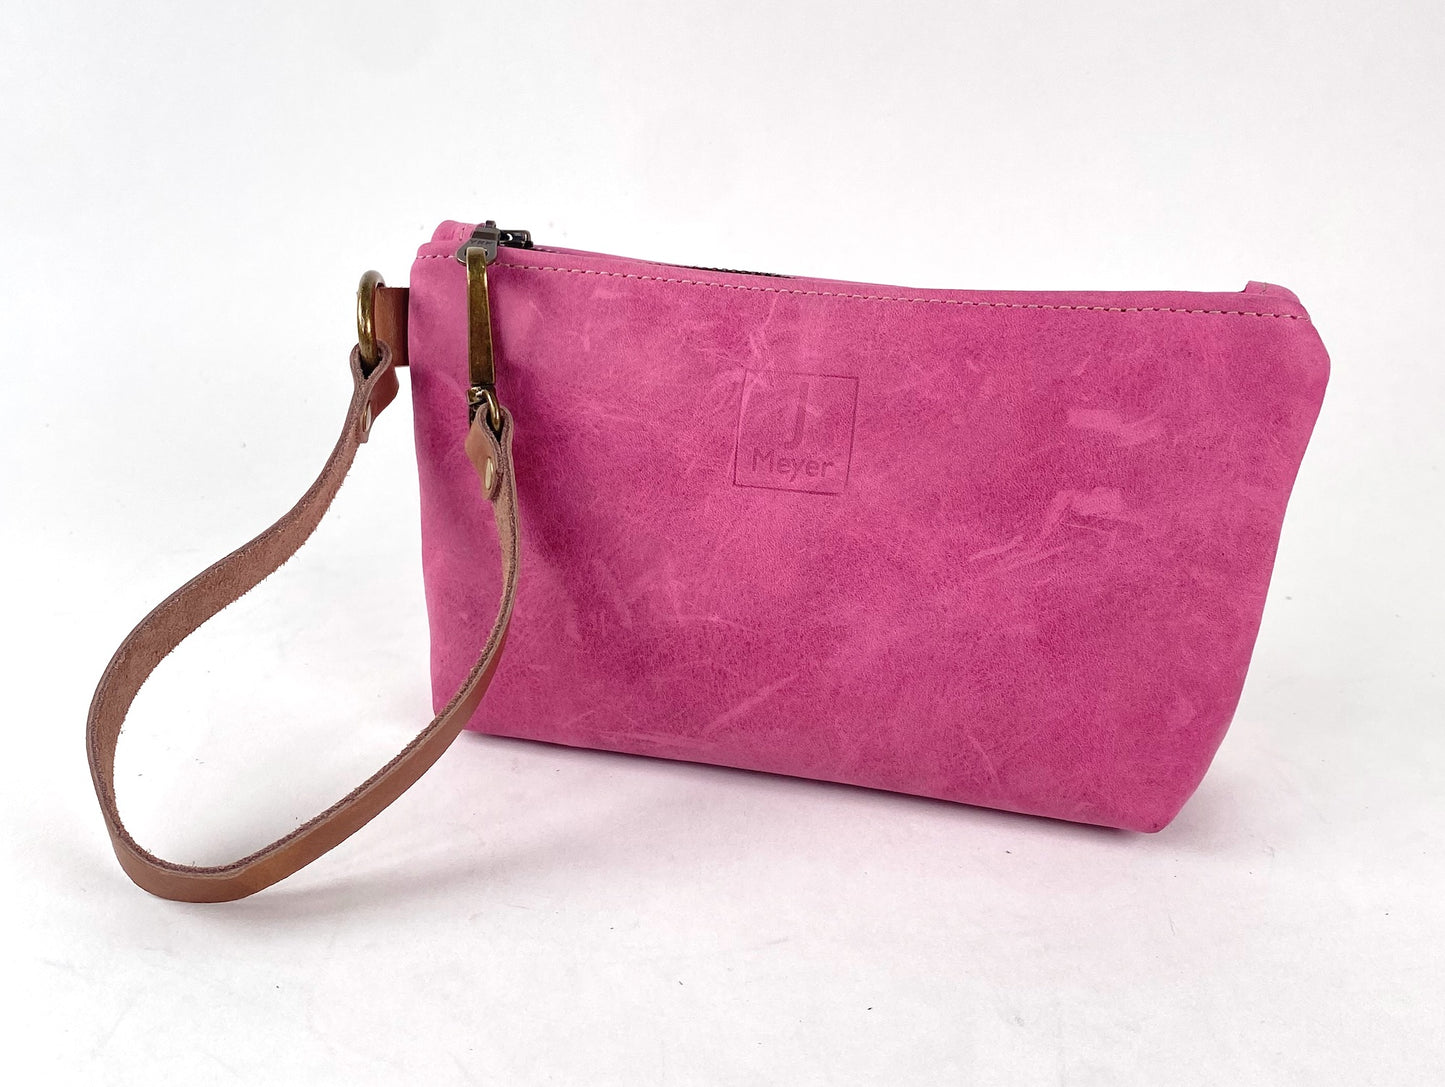 Tagalong Clutch Purse in Barbie Pink